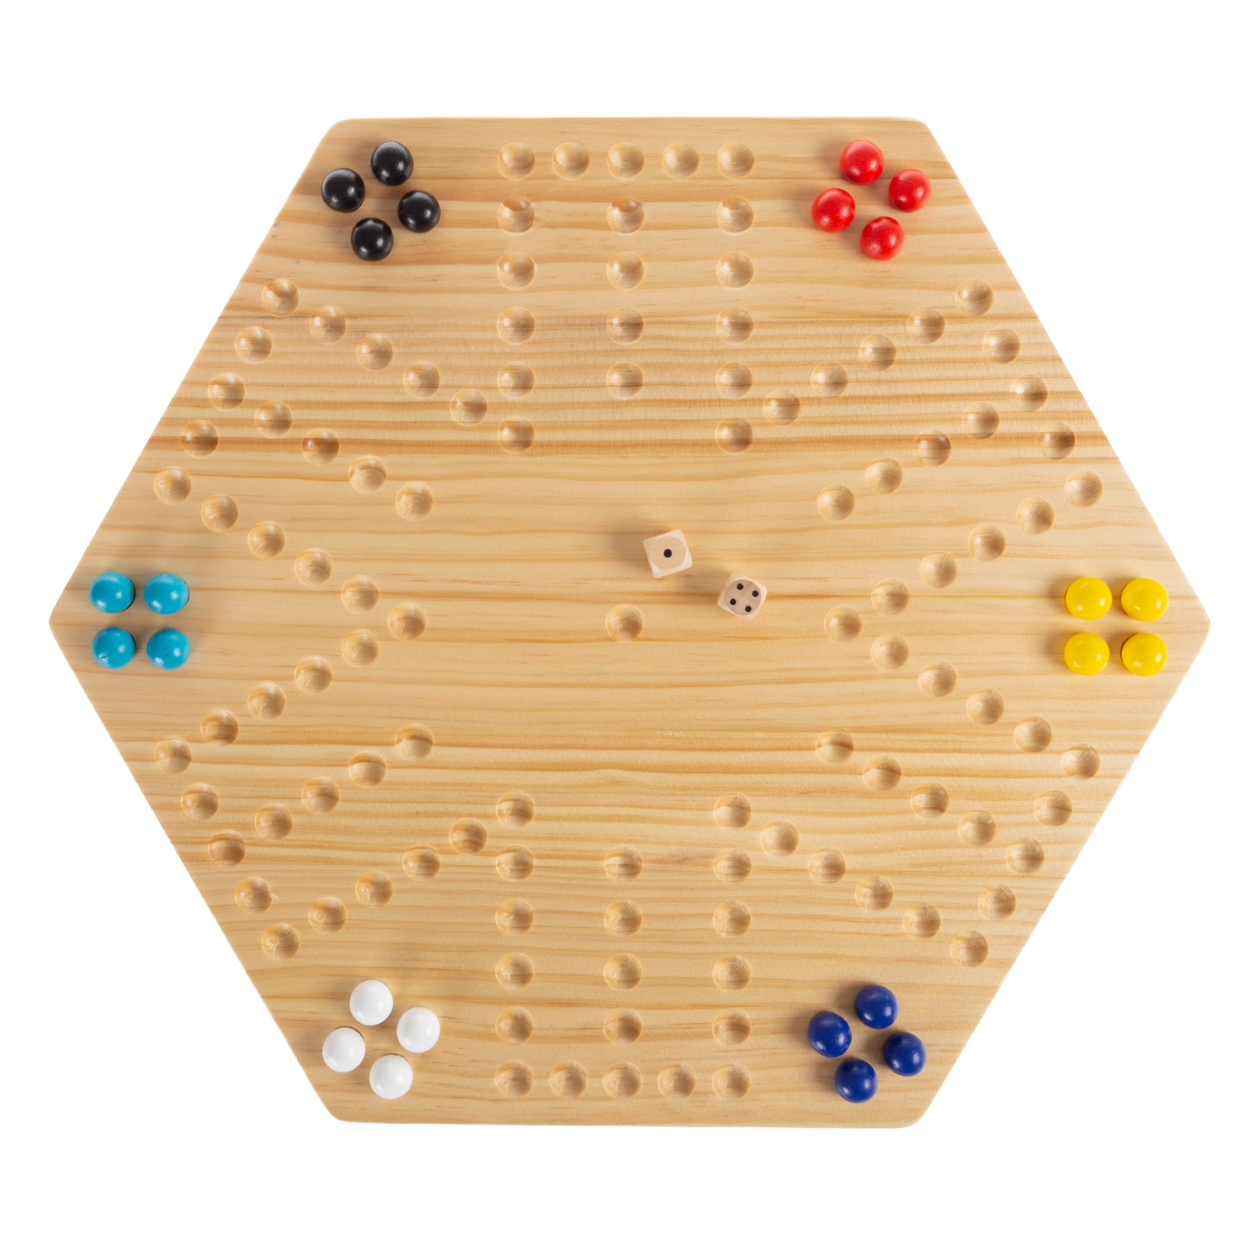 Classic Wooden Strategic Thinking Game Complete Set With Board, 24 Colored Marbles, 2 Dice- Fun